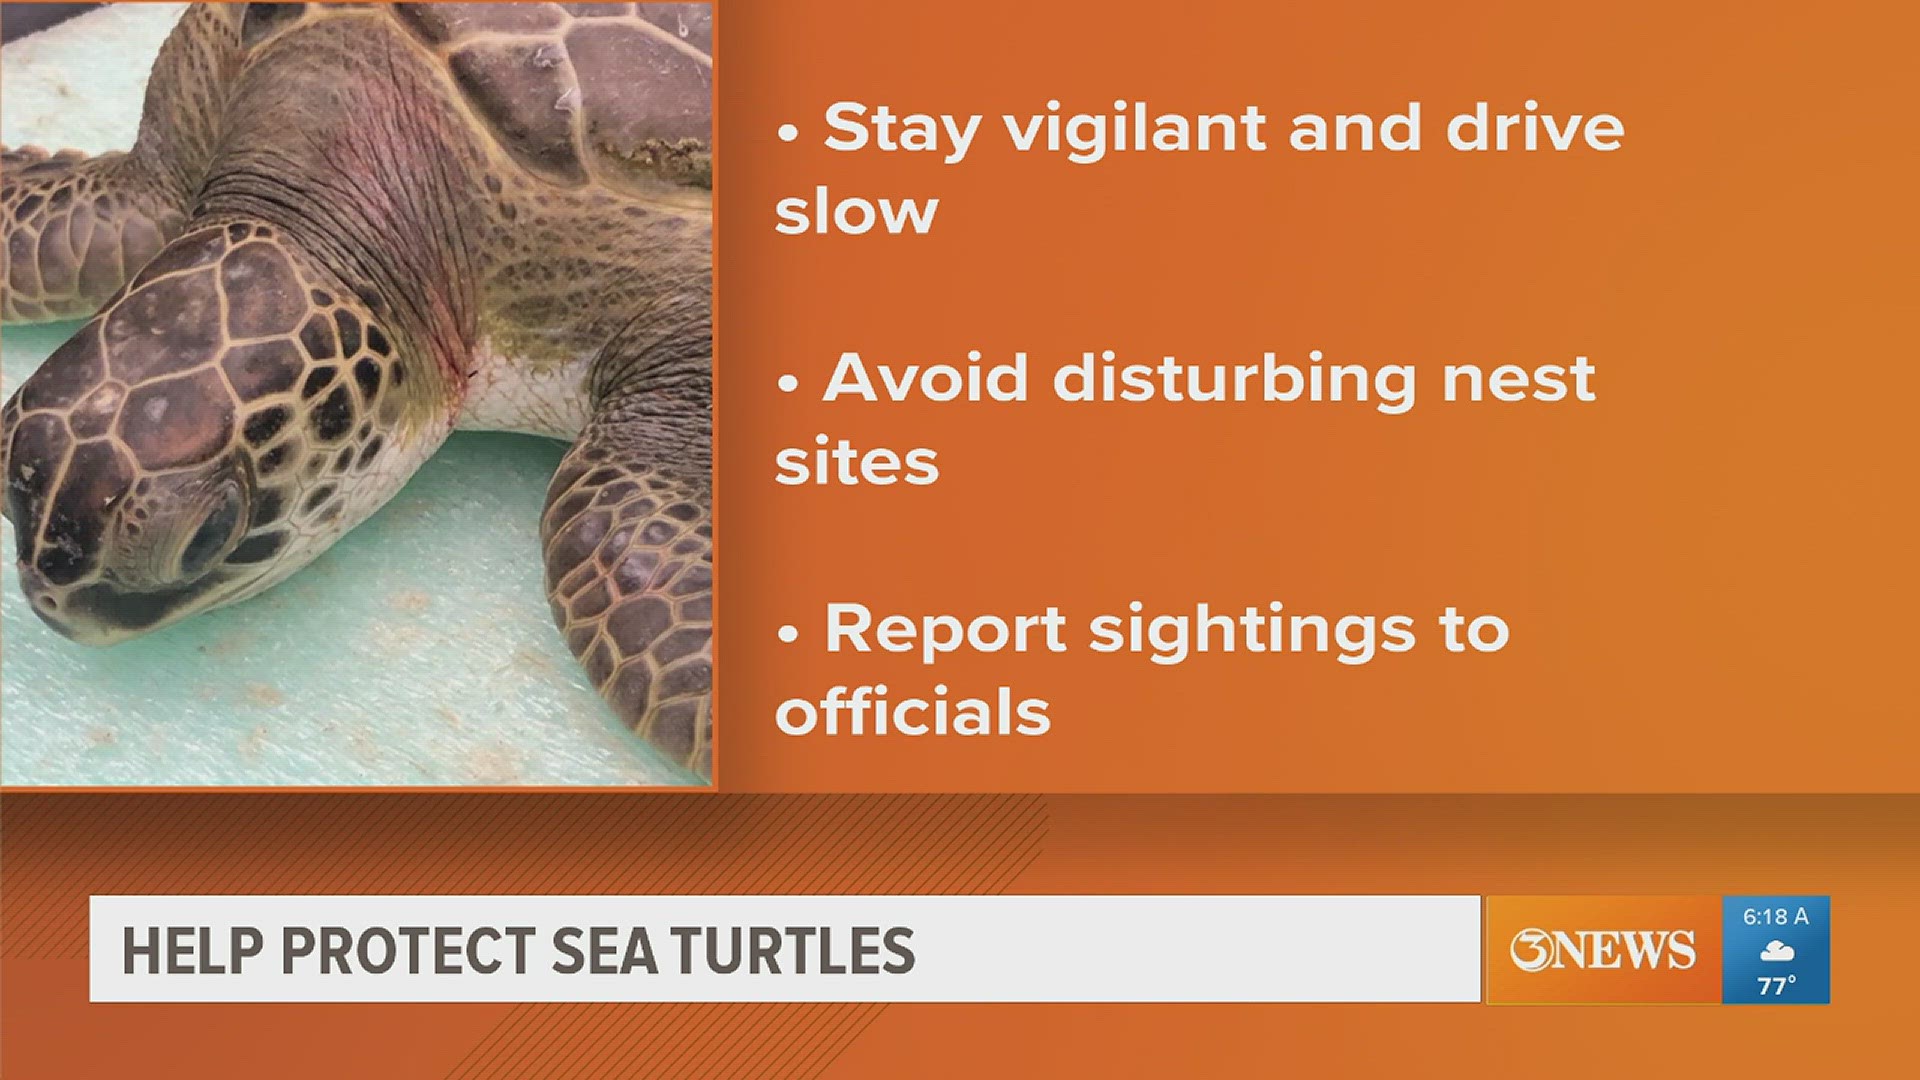 Turtles are expected to nest both during the day and at night from April through August.